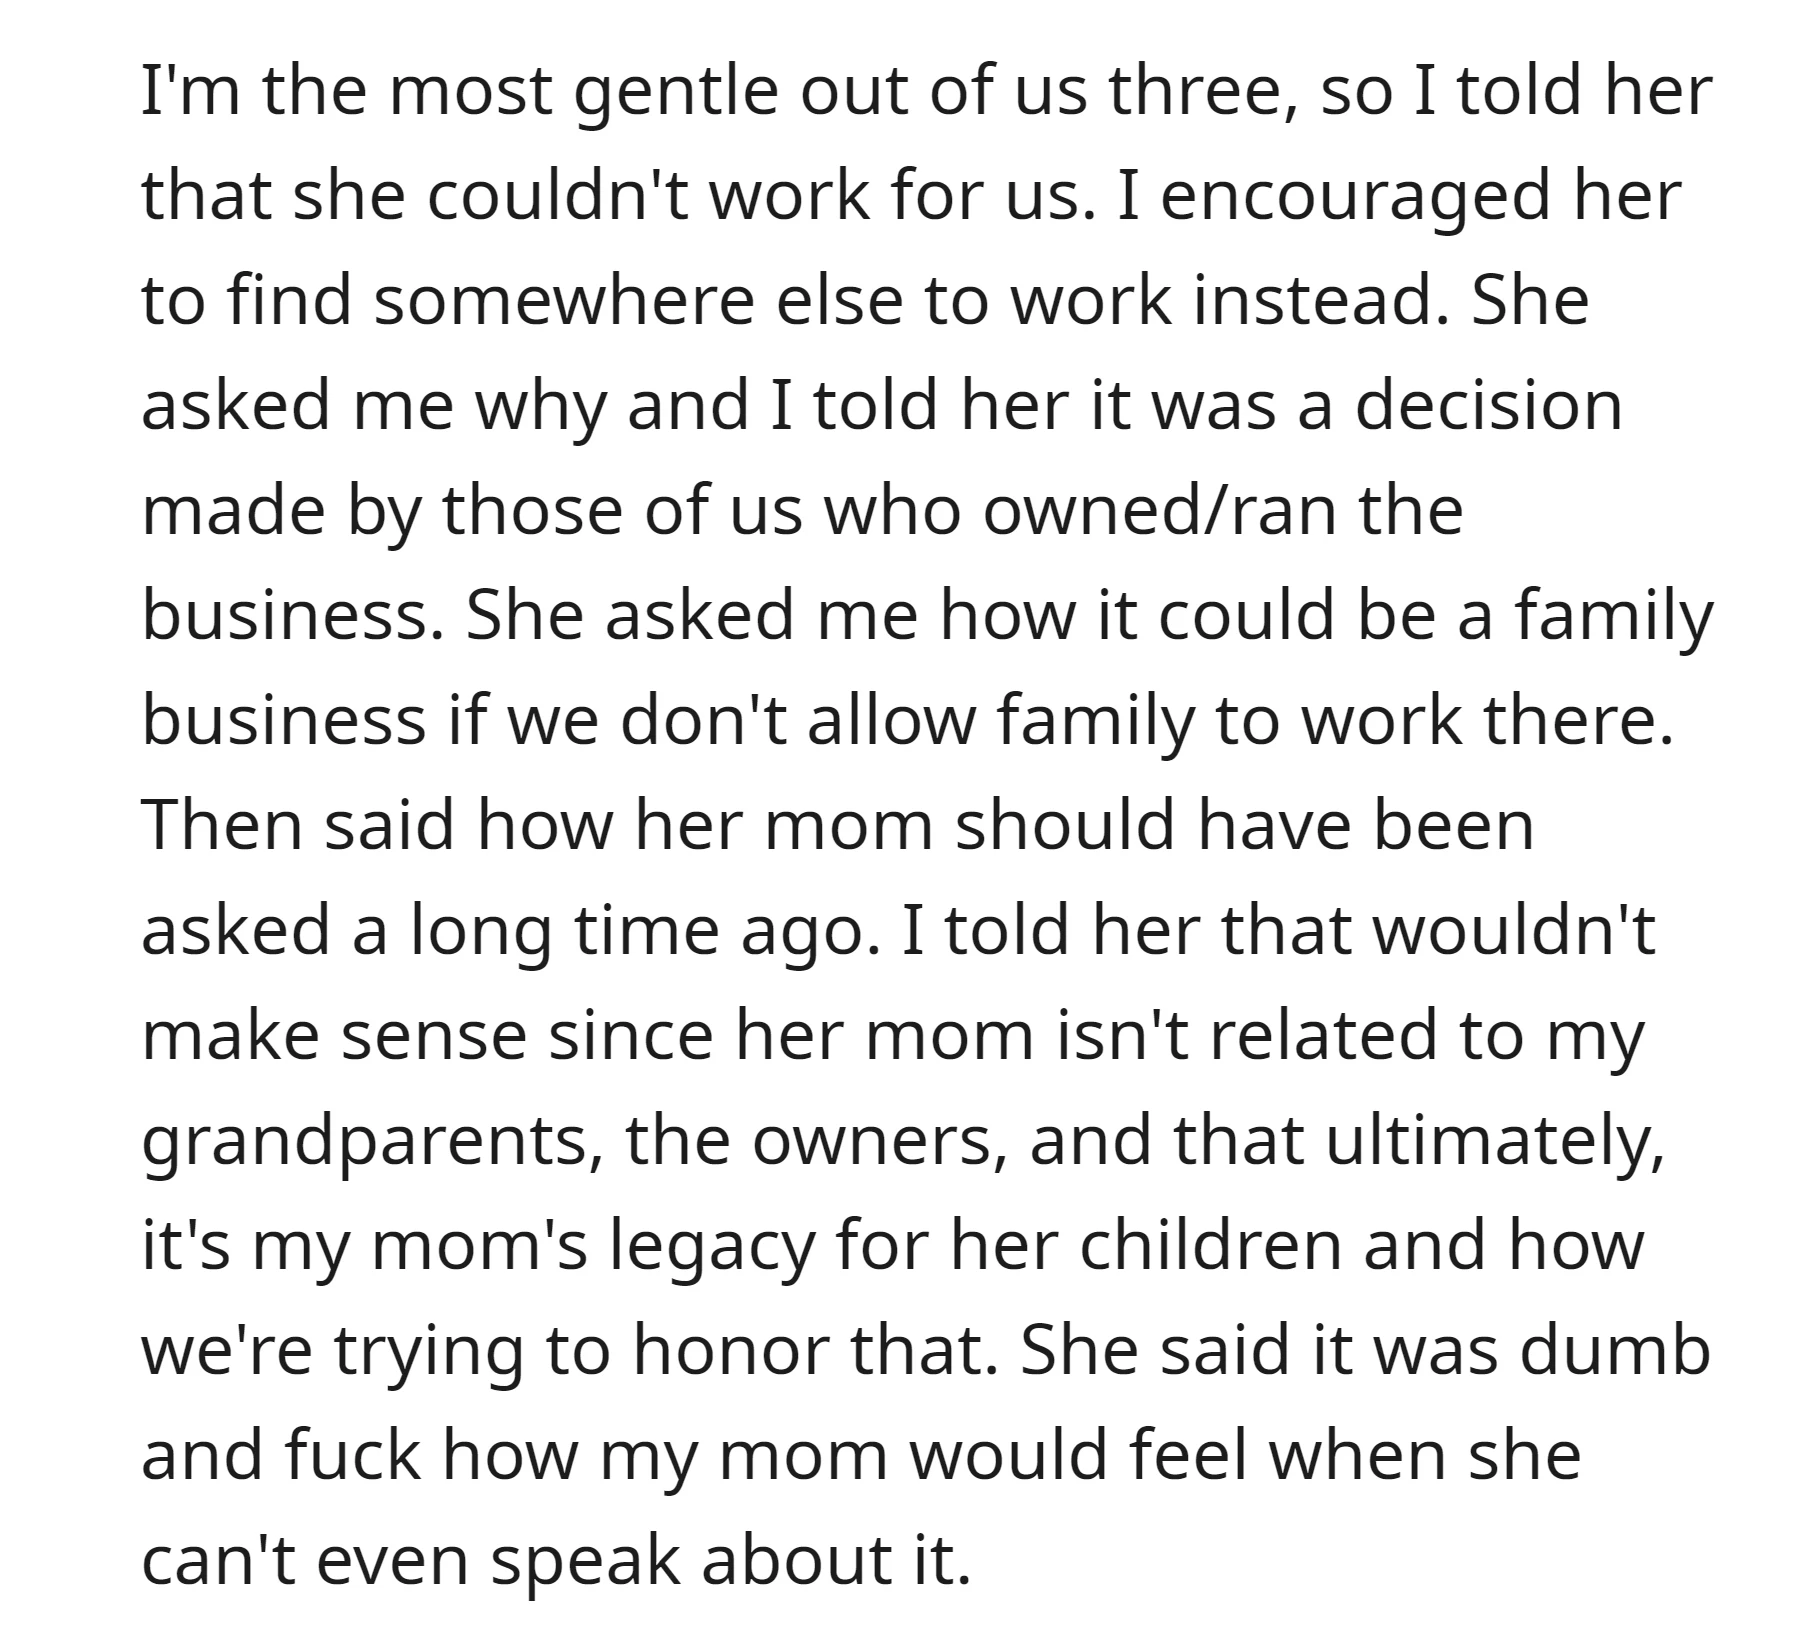 OP explained to their half sister that she couldn't work at the family restaurant because it's their mom's legacy, she got frustrated